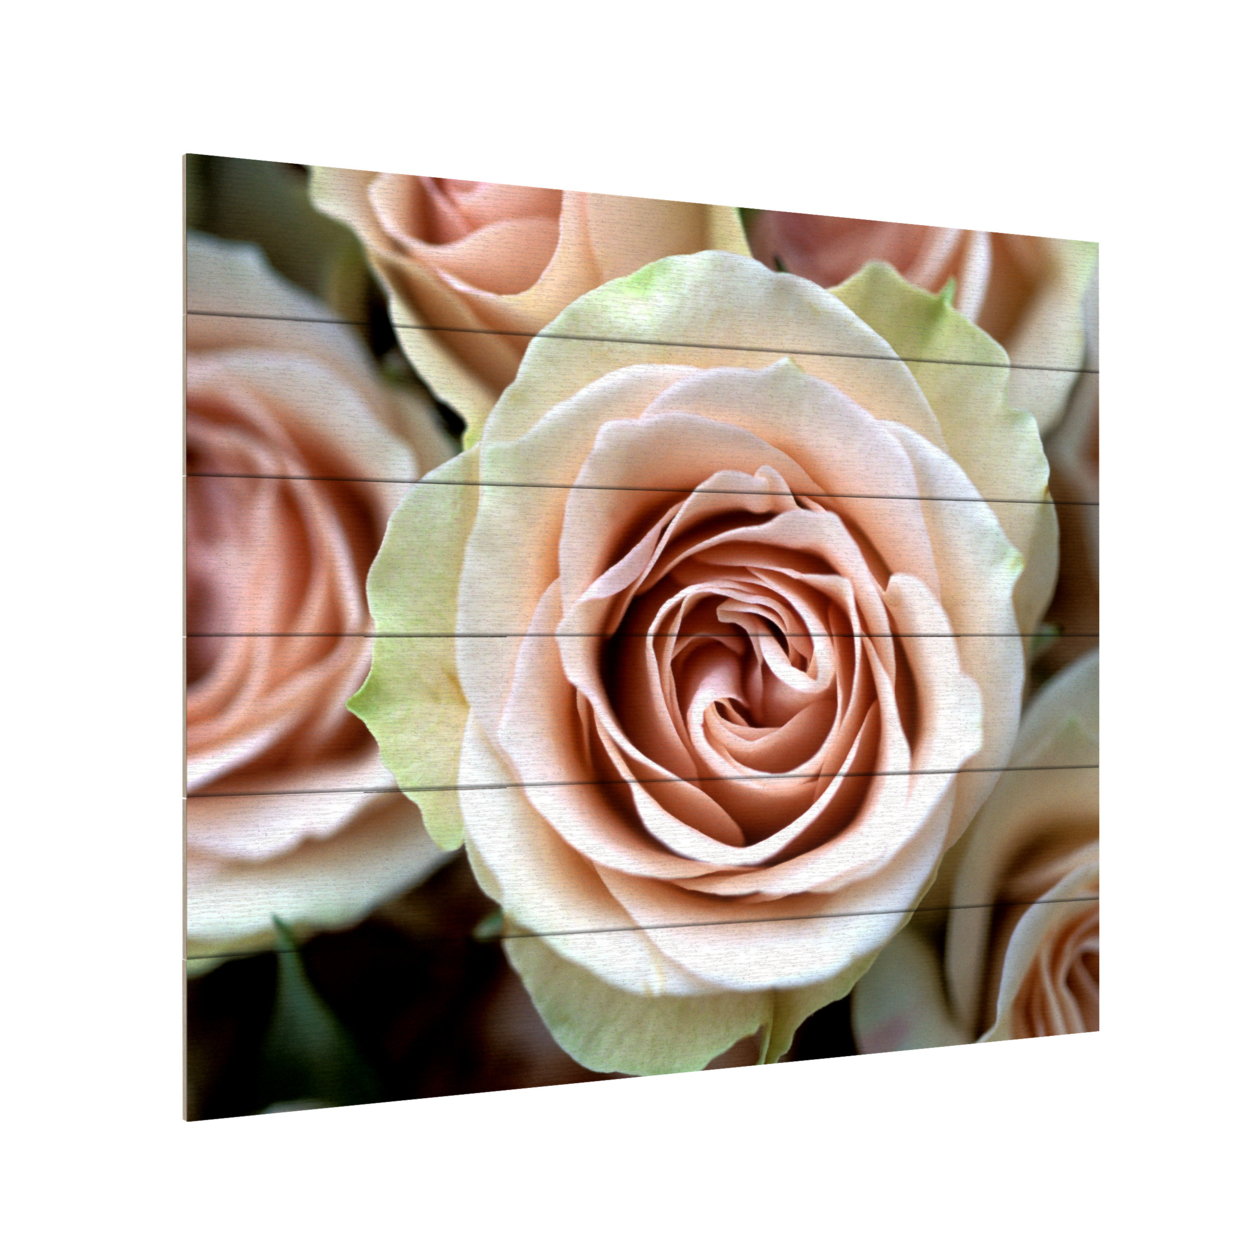 Wooden Slat Art 18 X 22 Inches Titled Pale Pink Roses Ready To Hang Home Decor Picture